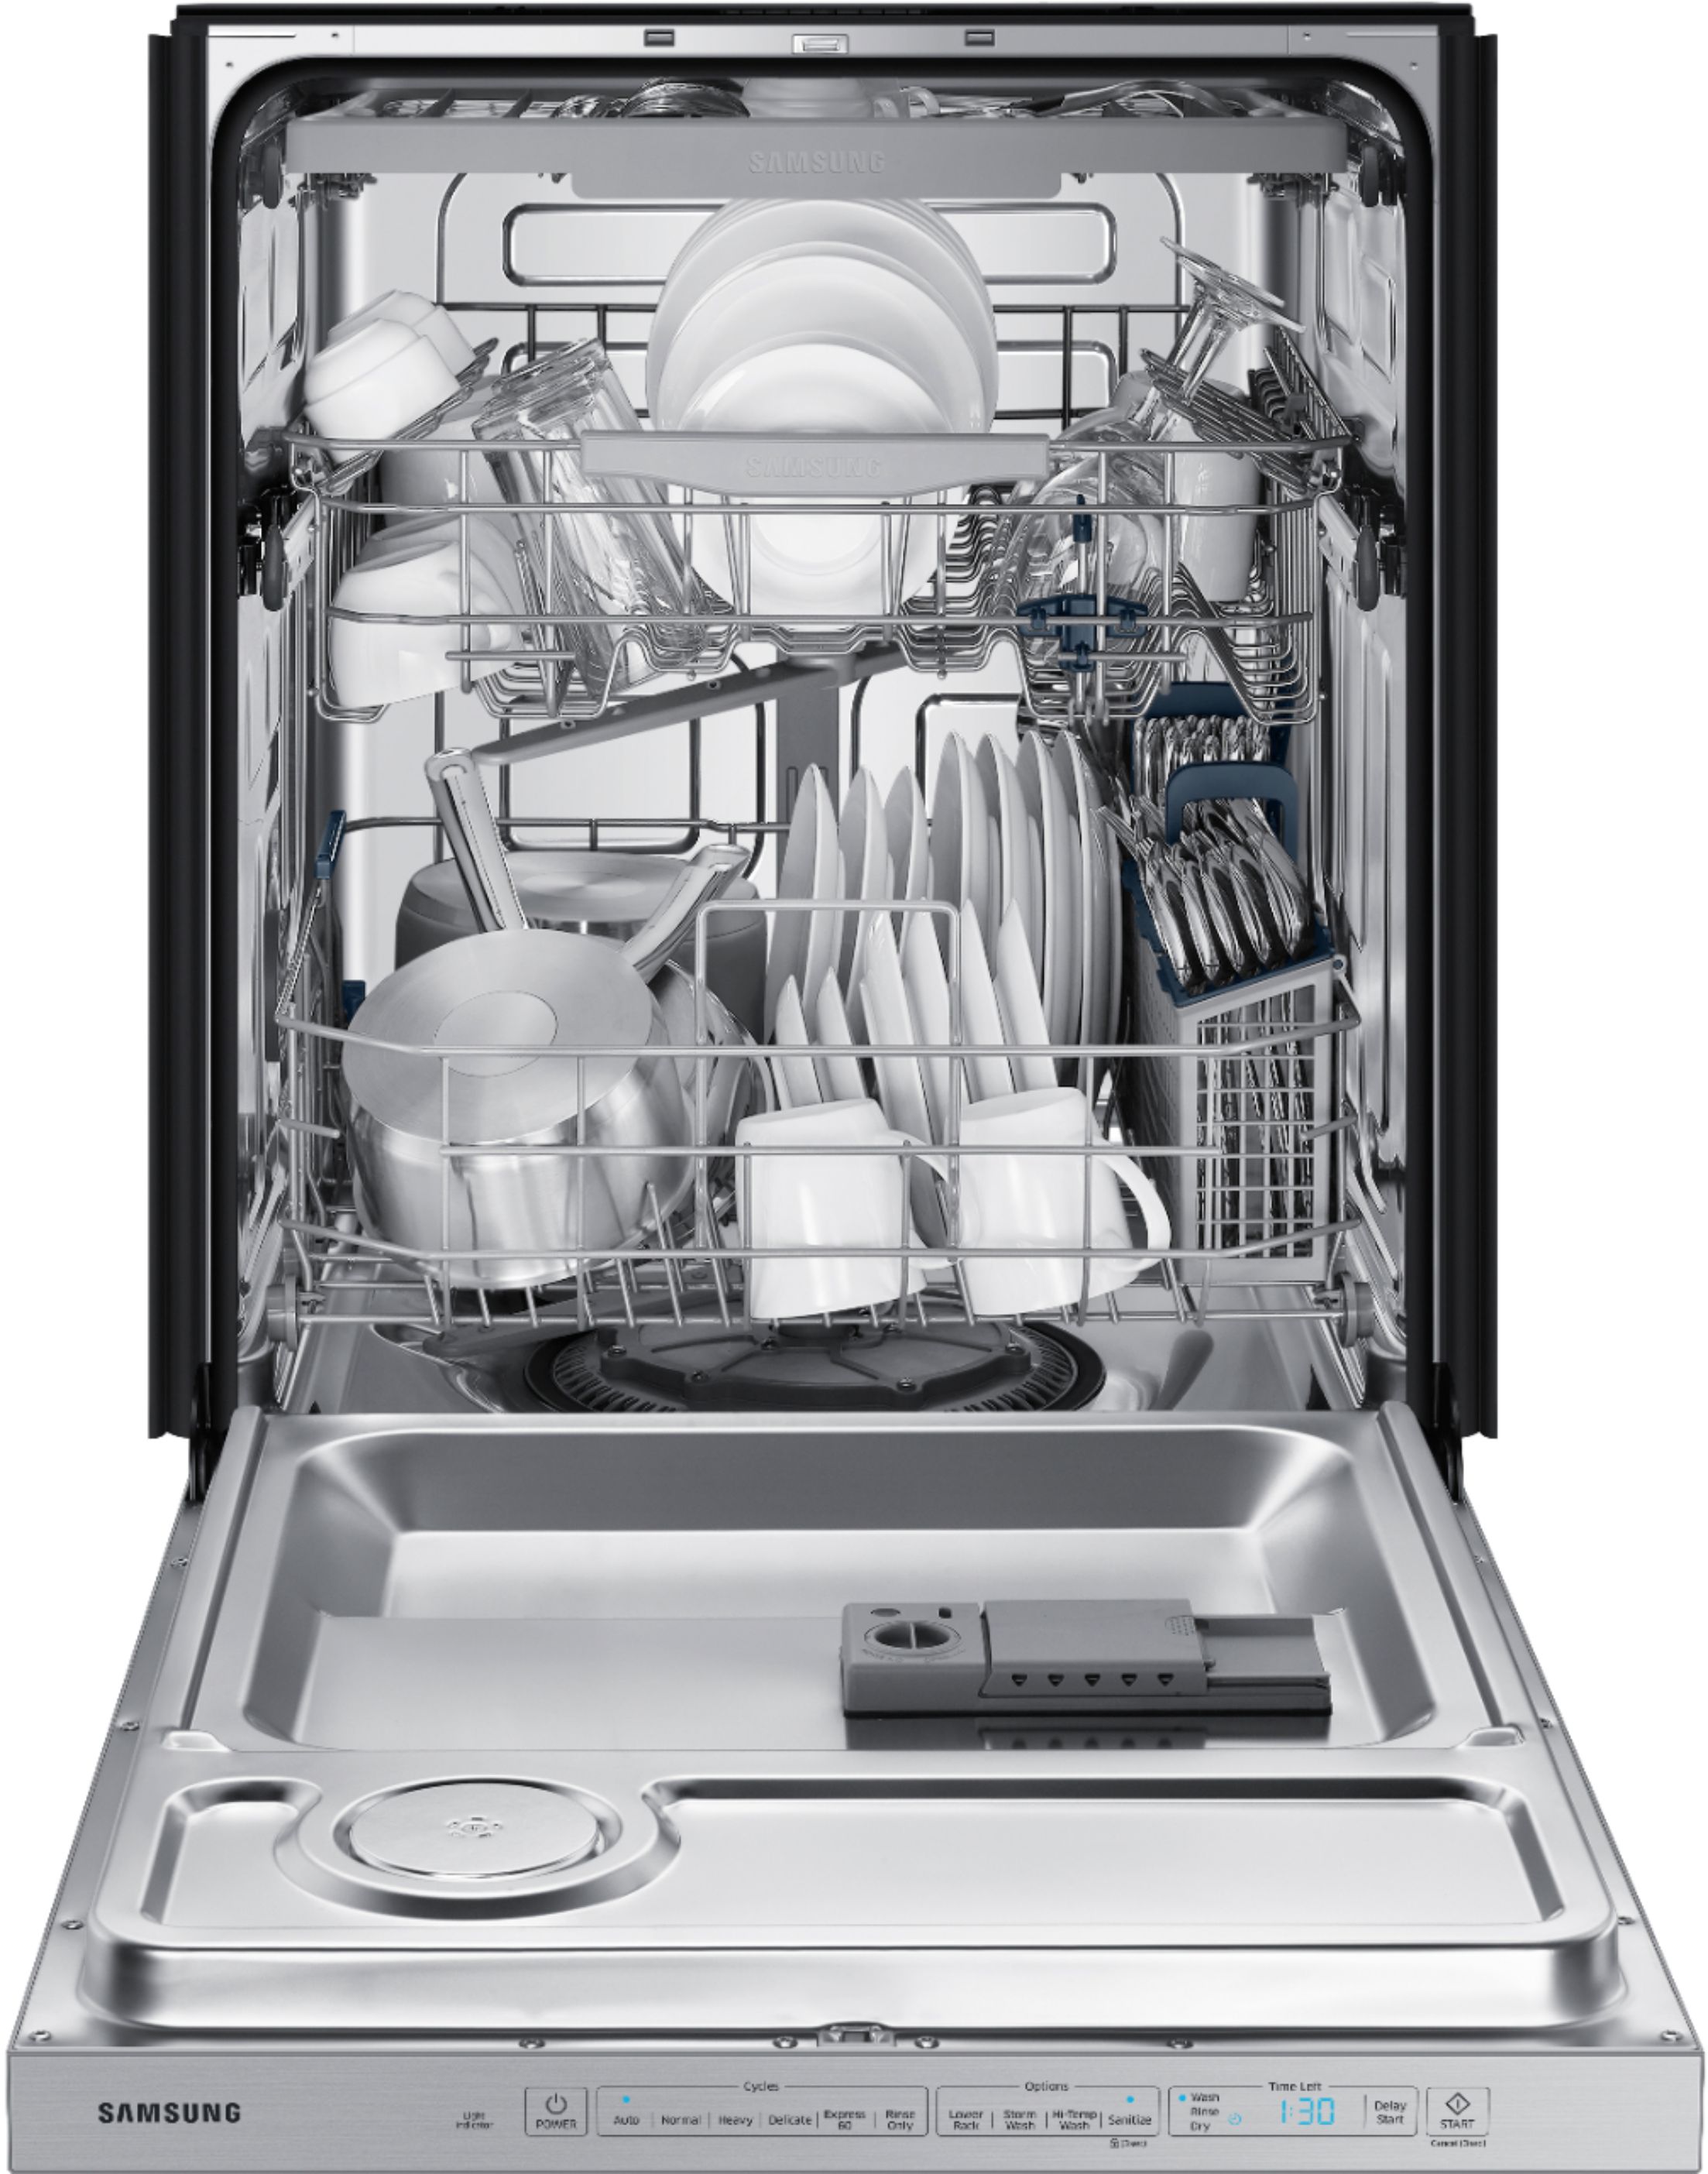 How To Load A Samsung Dishwasher